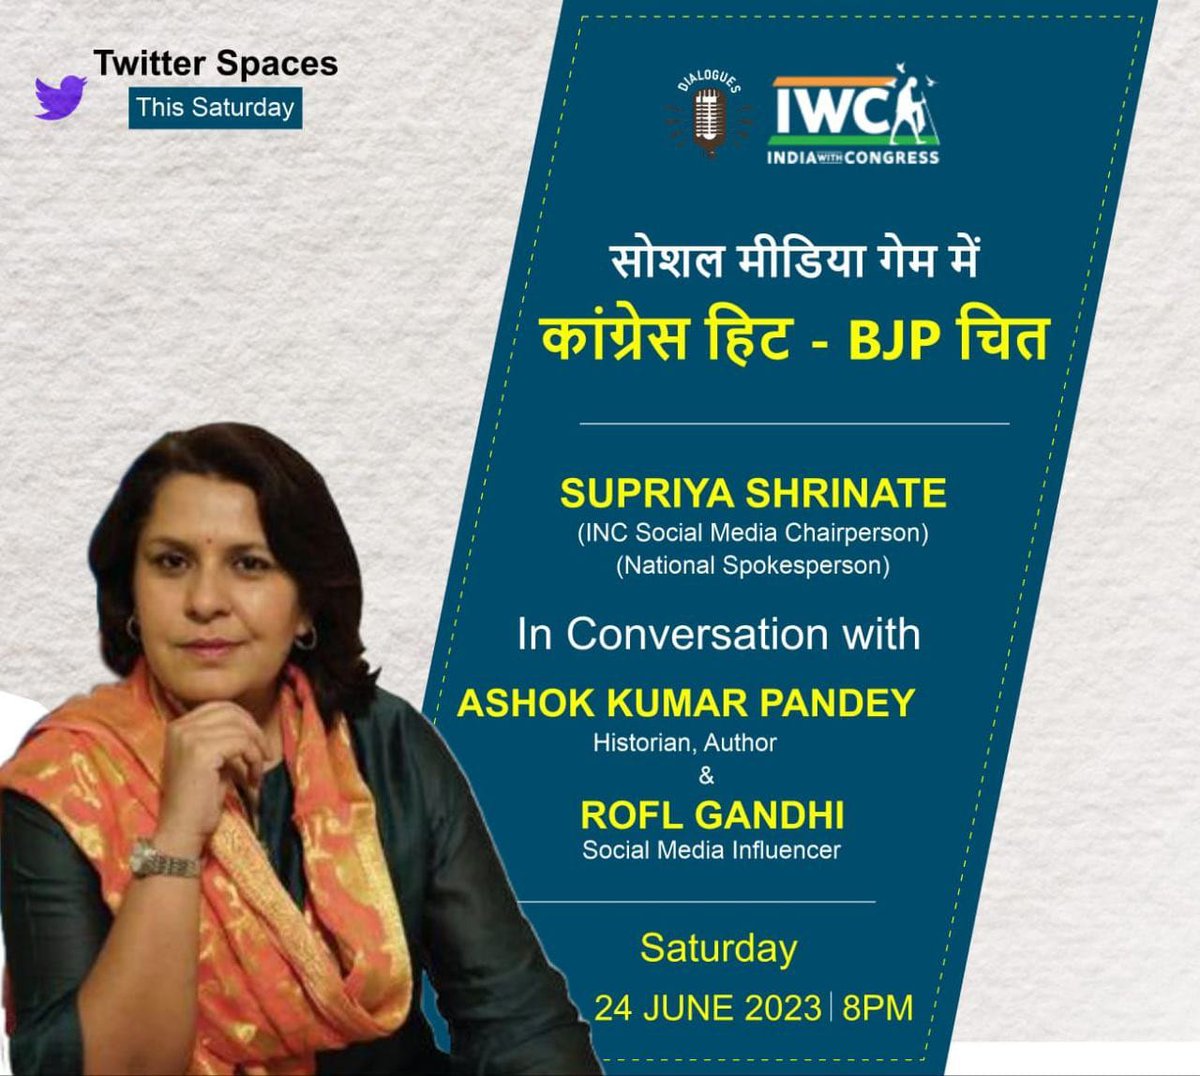 सोशल मीडिया गेम में, कांग्रेस हिट - BJP चित

#IndiaWithCongress brings an interactive session of @SupriyaShrinate with @Ashok_Kashmir and @RoflGandhi_ on How Congress Rise, Roar and Resonate on Social Media

On Sat, 24th June 2023 @ 8 PM 

Space link:

x.com/i/spaces/1oyka…